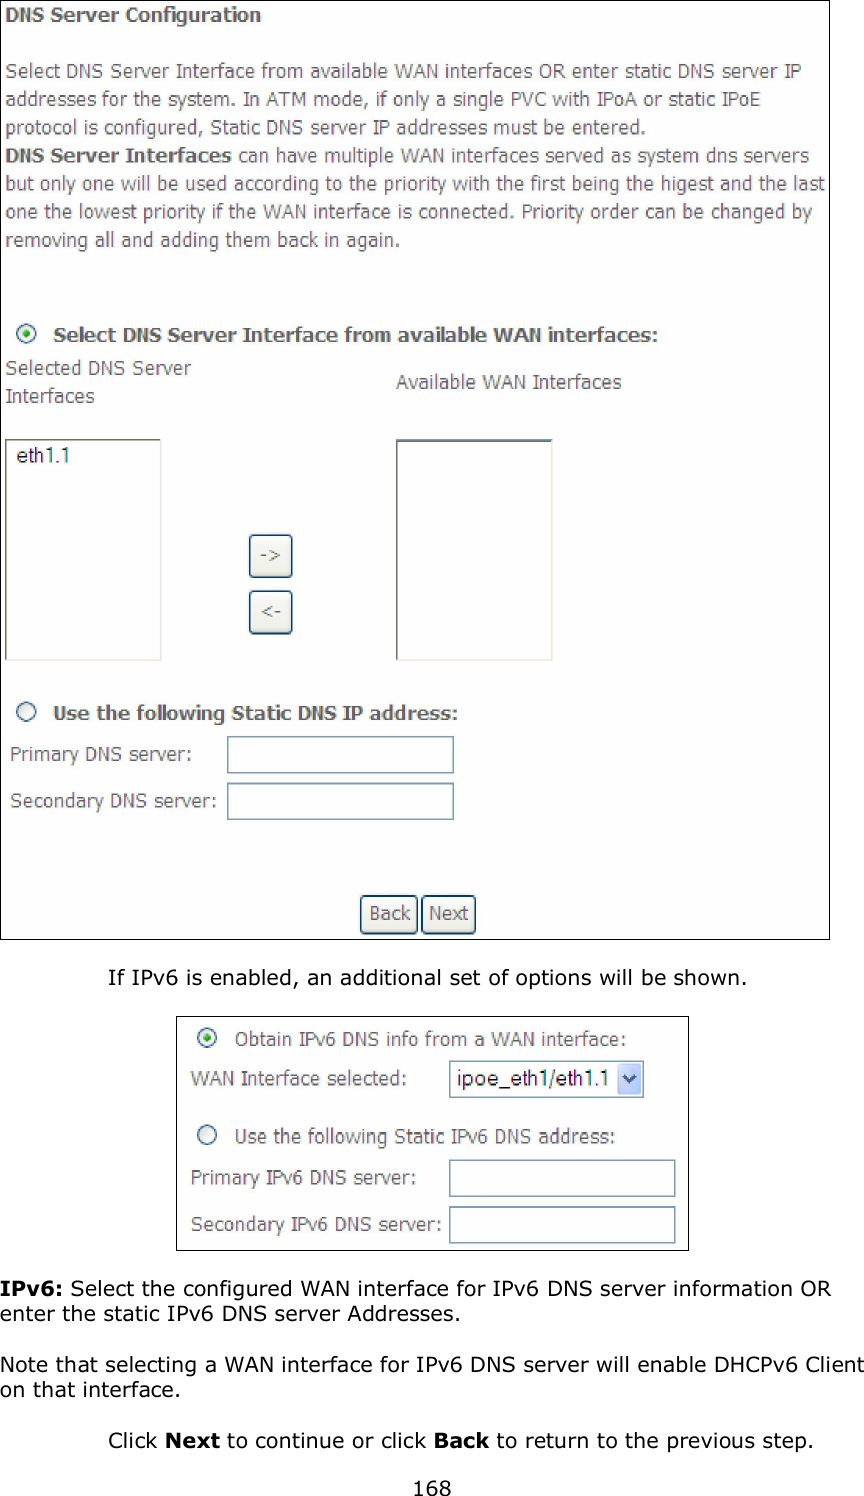  168     If IPv6 is enabled, an additional set of options will be shown.    IPv6: Select the configured WAN interface for IPv6 DNS server information OR enter the static IPv6 DNS server Addresses.  Note that selecting a WAN interface for IPv6 DNS server will enable DHCPv6 Client on that interface.    Click Next to continue or click Back to return to the previous step. 